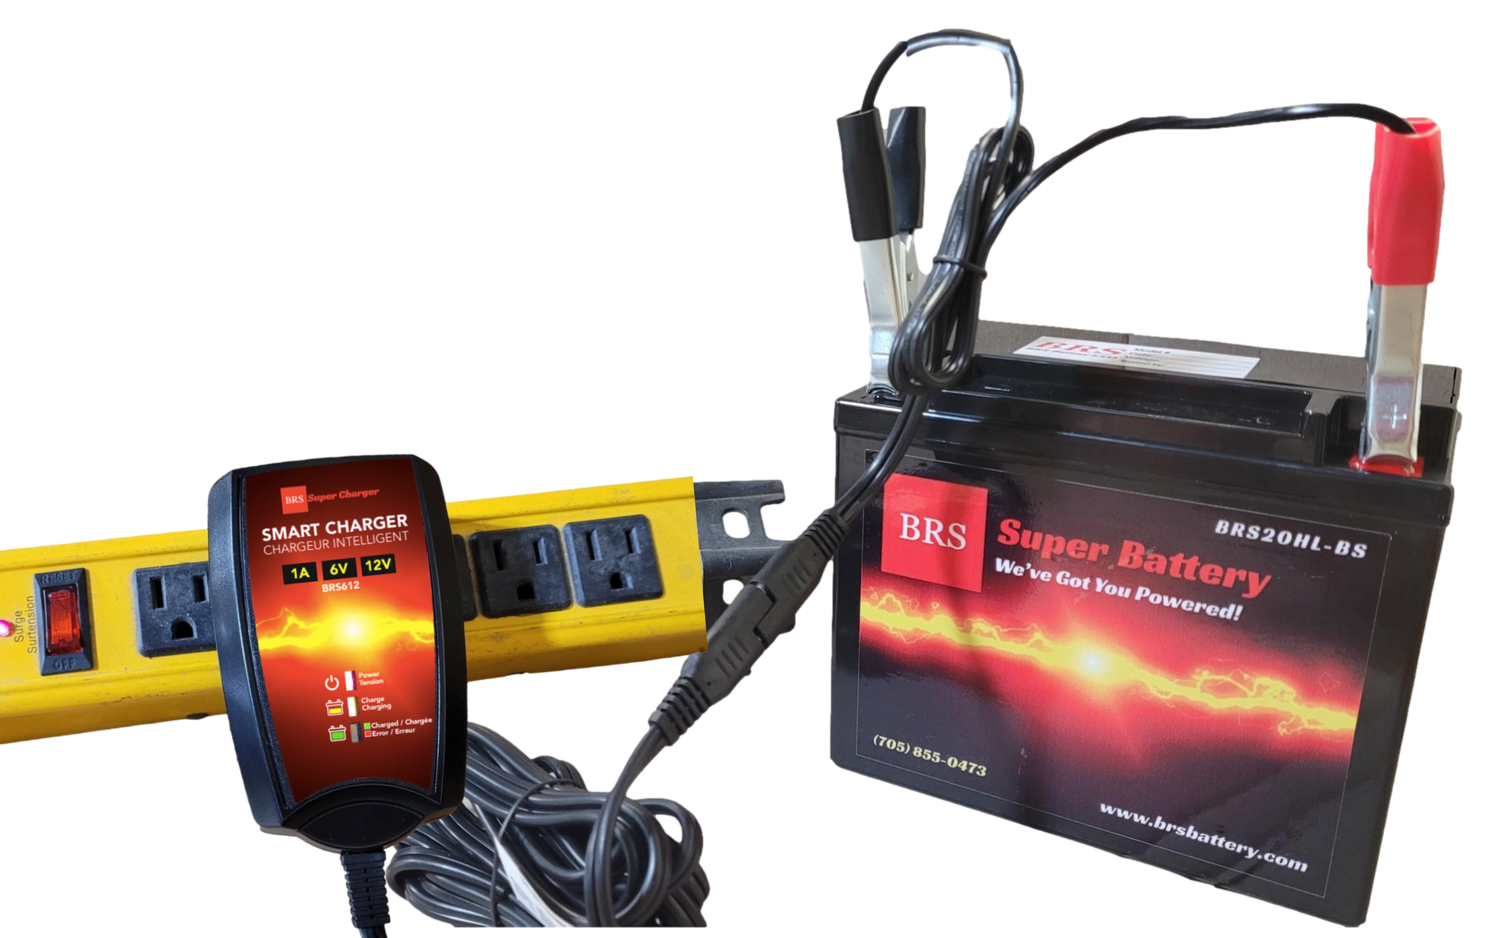 High Performance BRS30L-BS 10 Year Battery & Smart Charger / Maintainer Combo Bundle Kit 12v Sealed AGM PowerSports Battery - BRS Super Battery